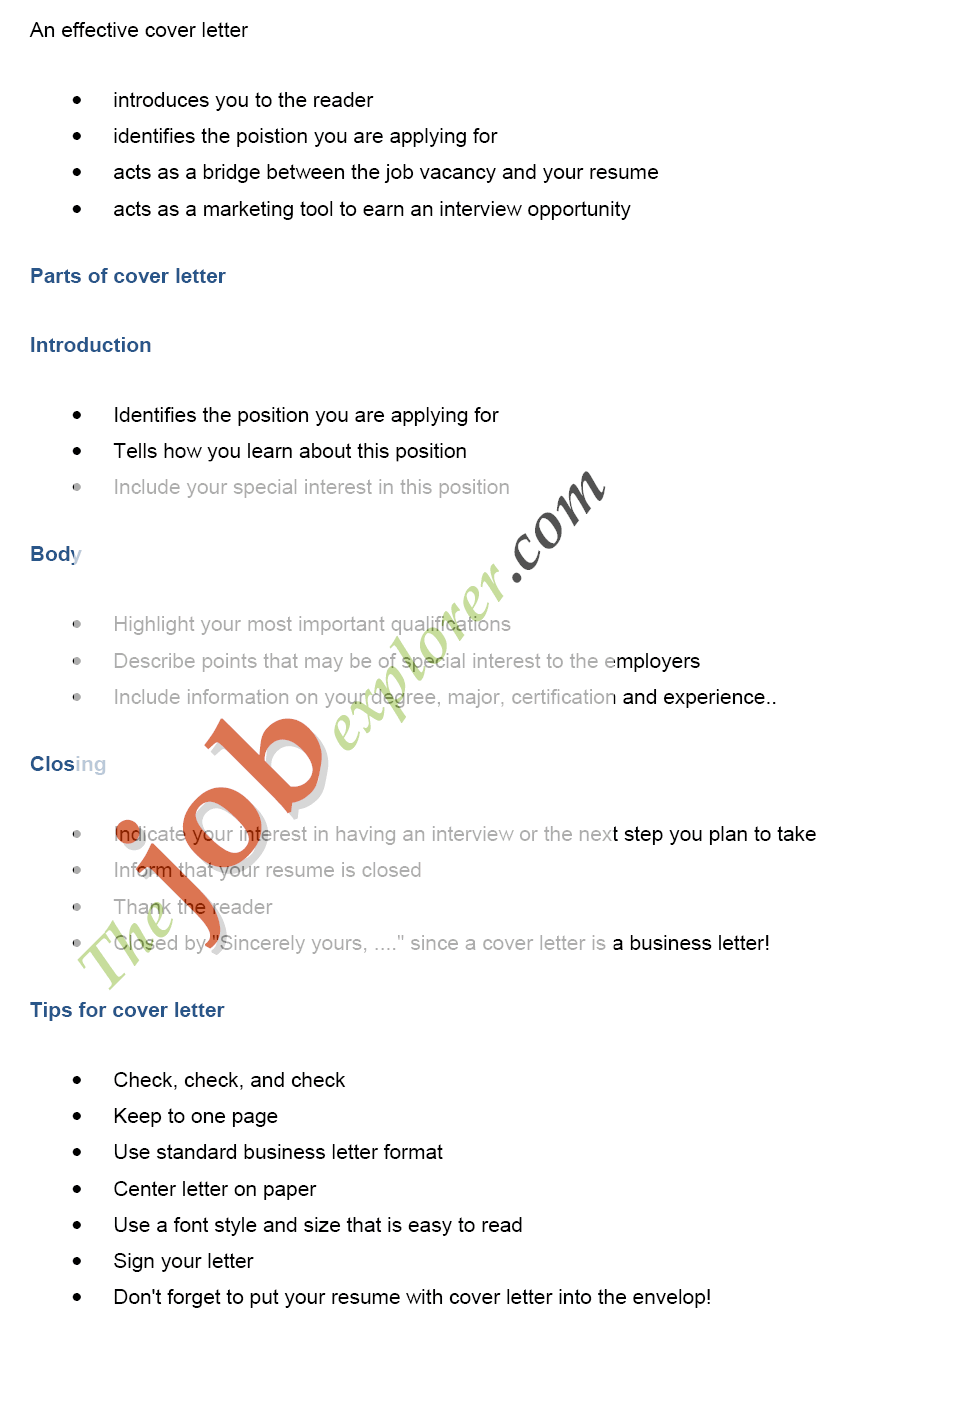 Cover Letter Sample For It Job Application from www.thejobexplorer.com